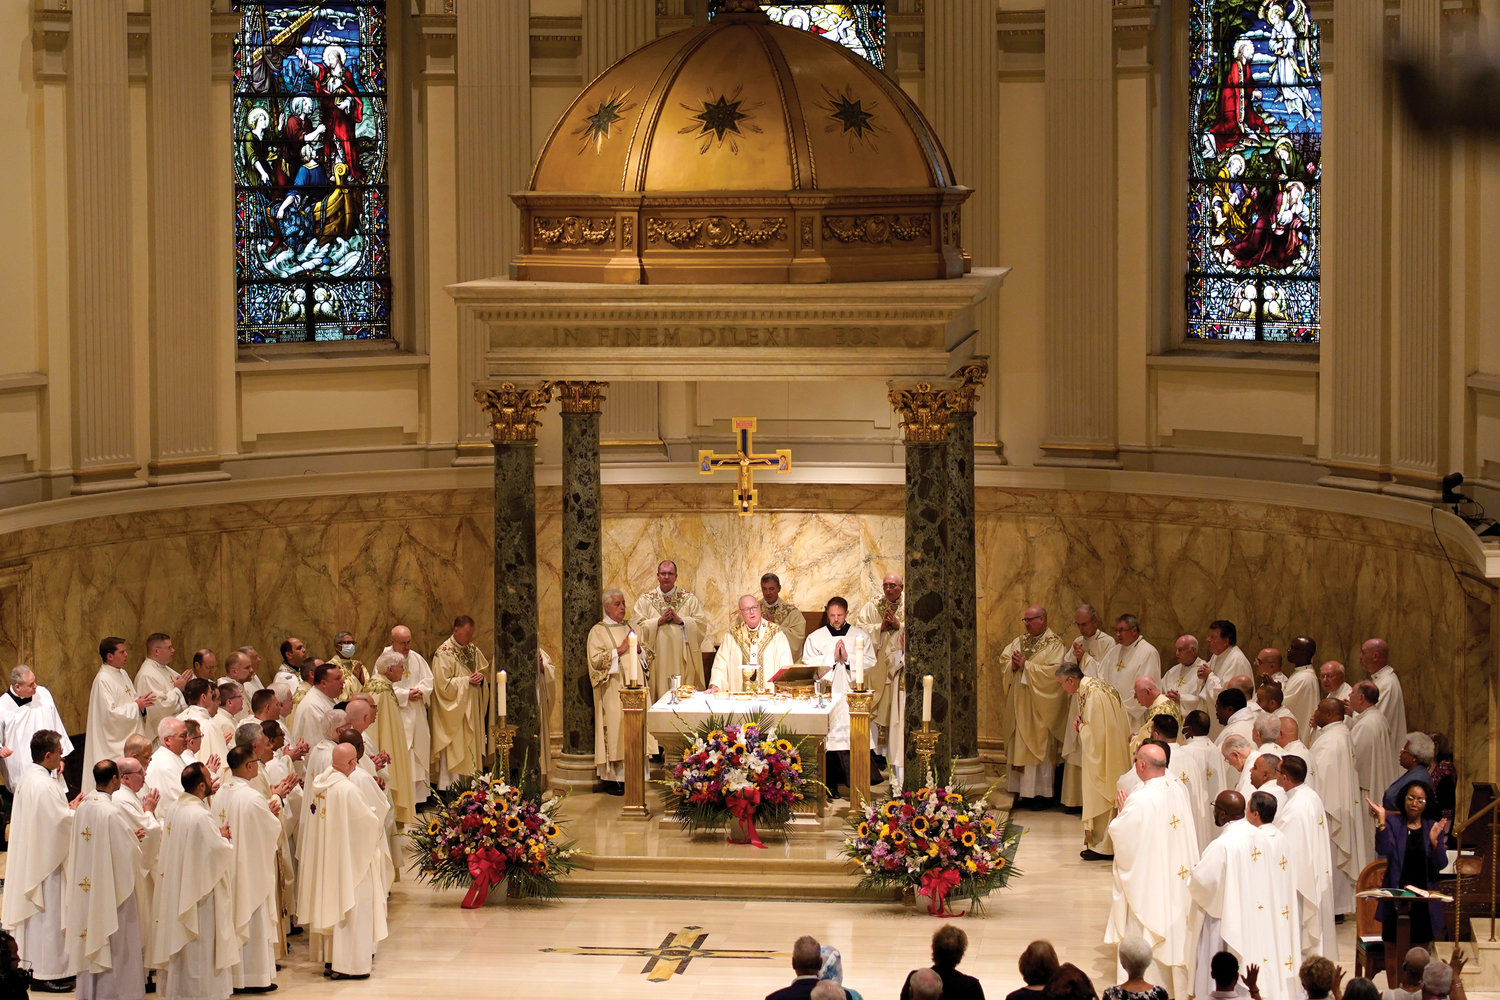 Cardinal Dolan celebrates a special Mass Aug. 14 at St. James Cathedral Basilica in Brooklyn, marking the 200th anniversary of the founding of St. James parish.